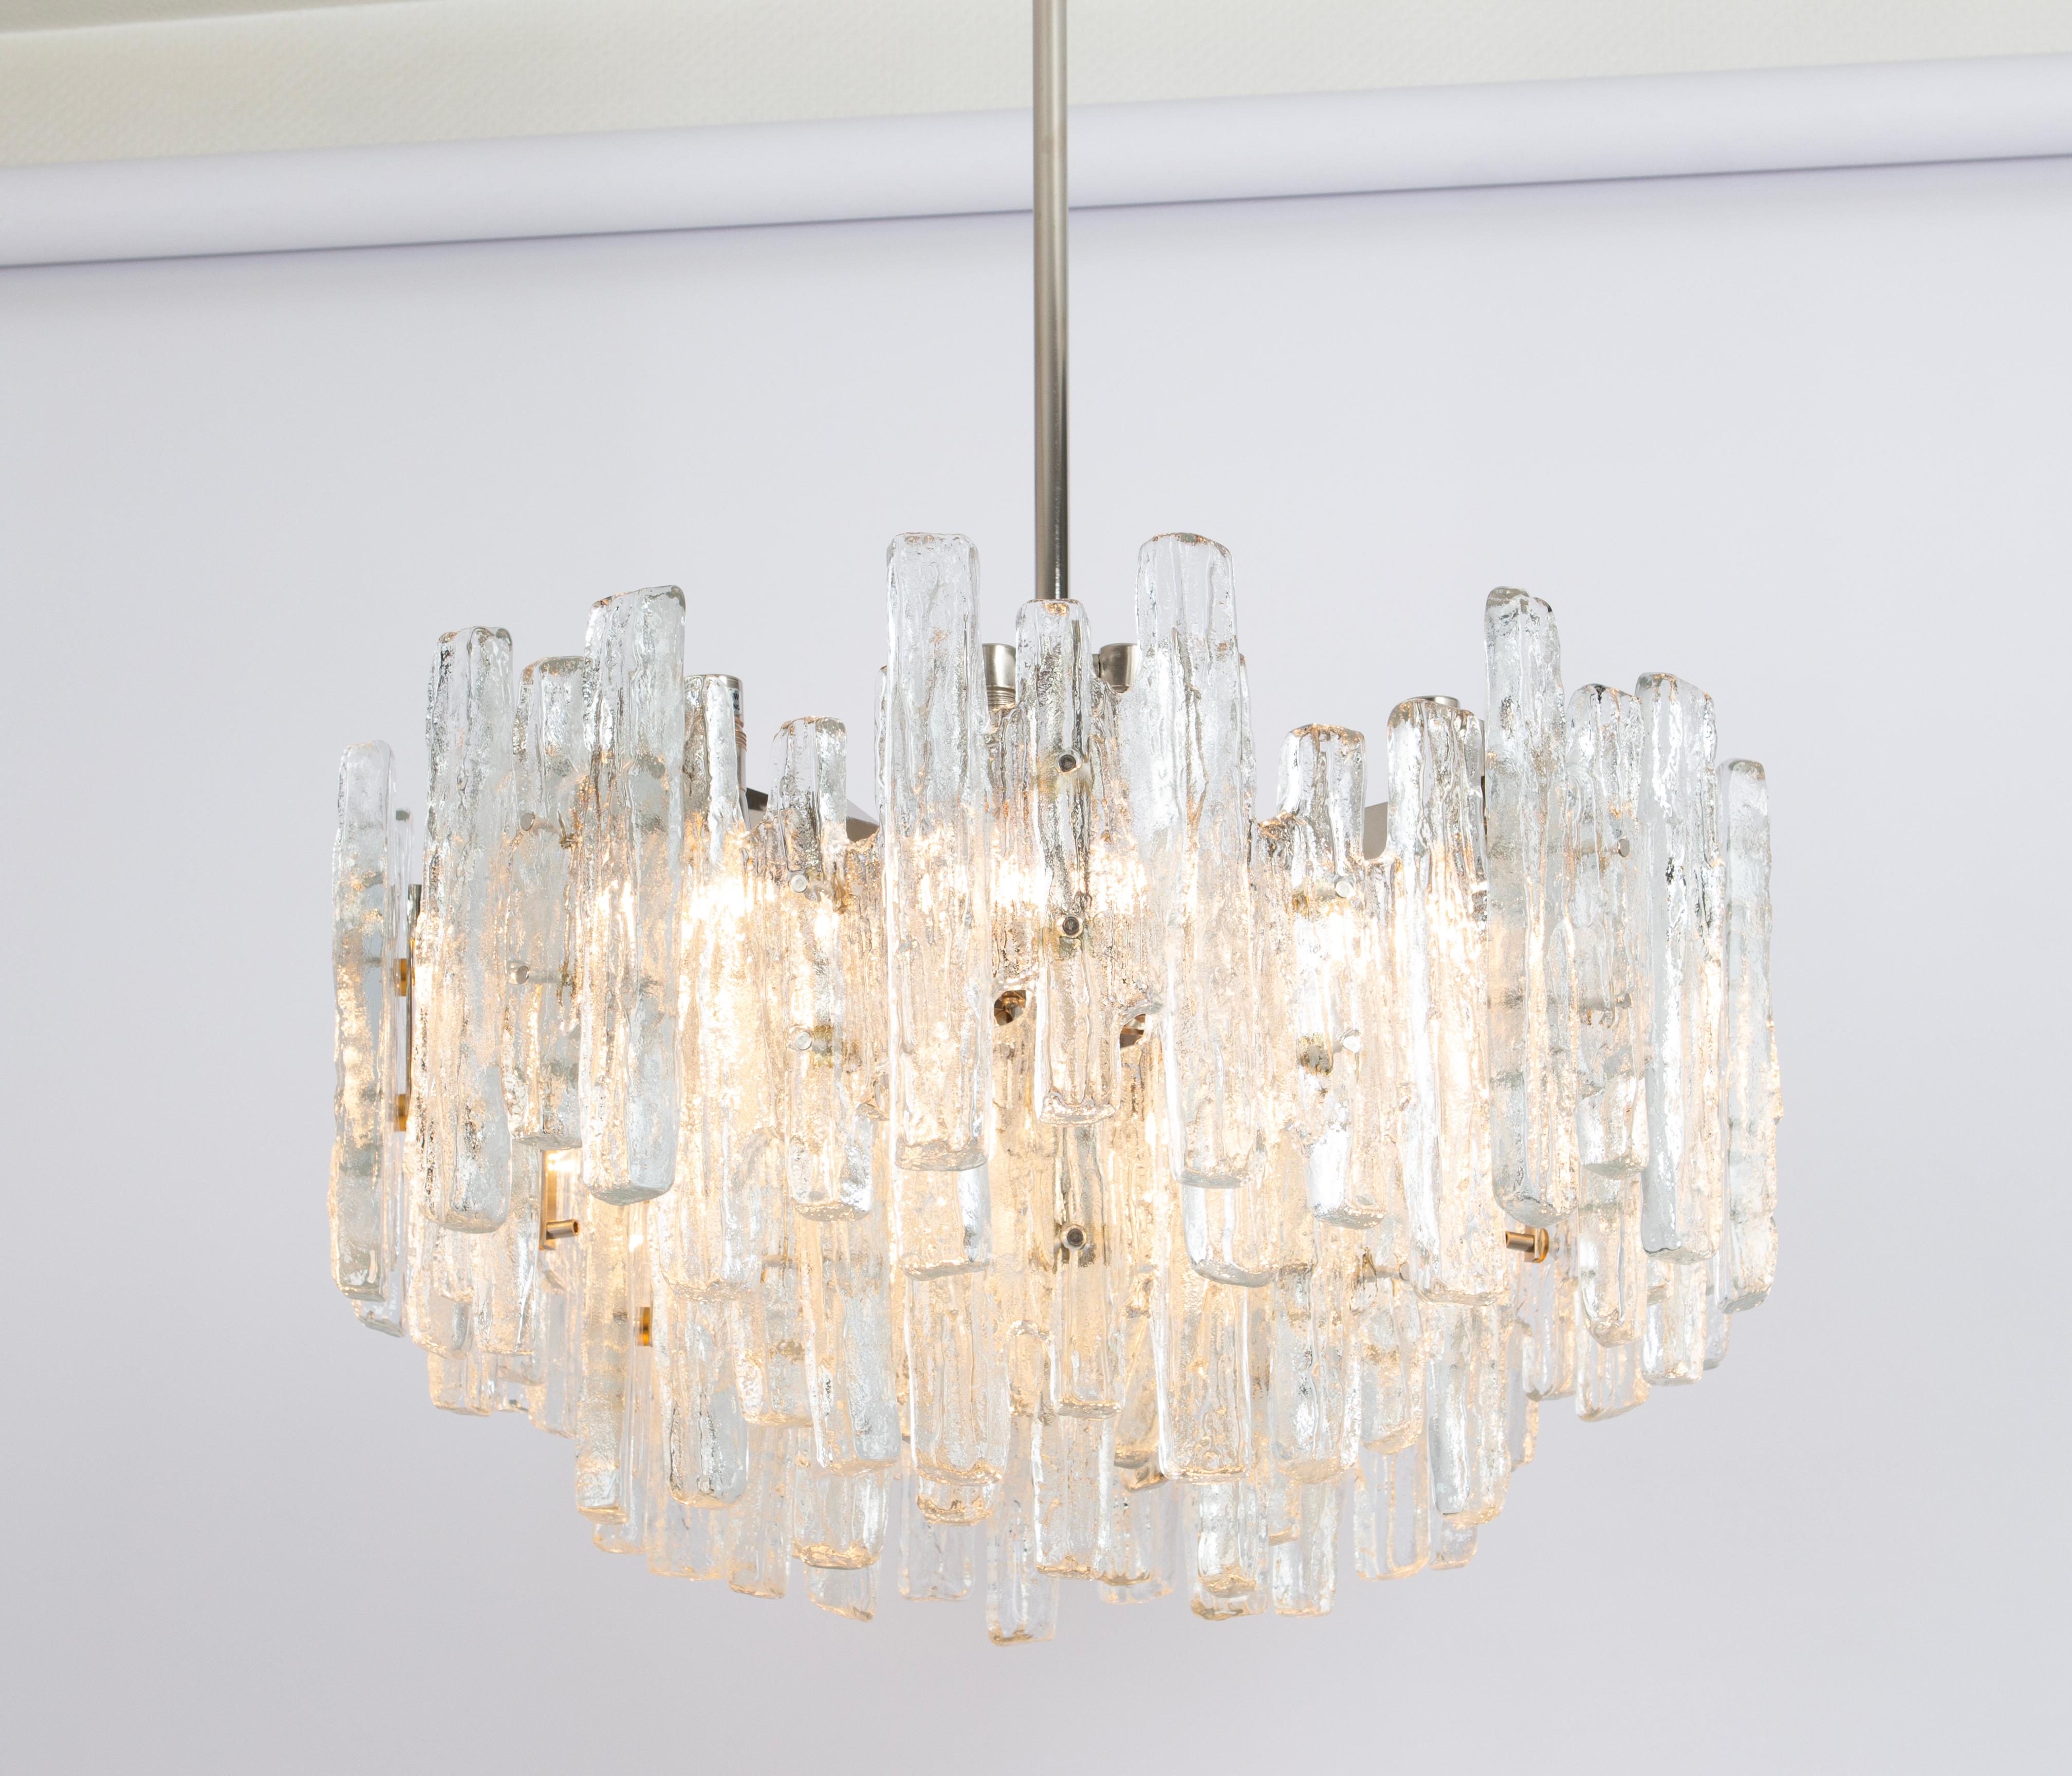 Large Rare Murano Ice Glass Chandelier by Kalmar, Austria, 1960s For Sale 2